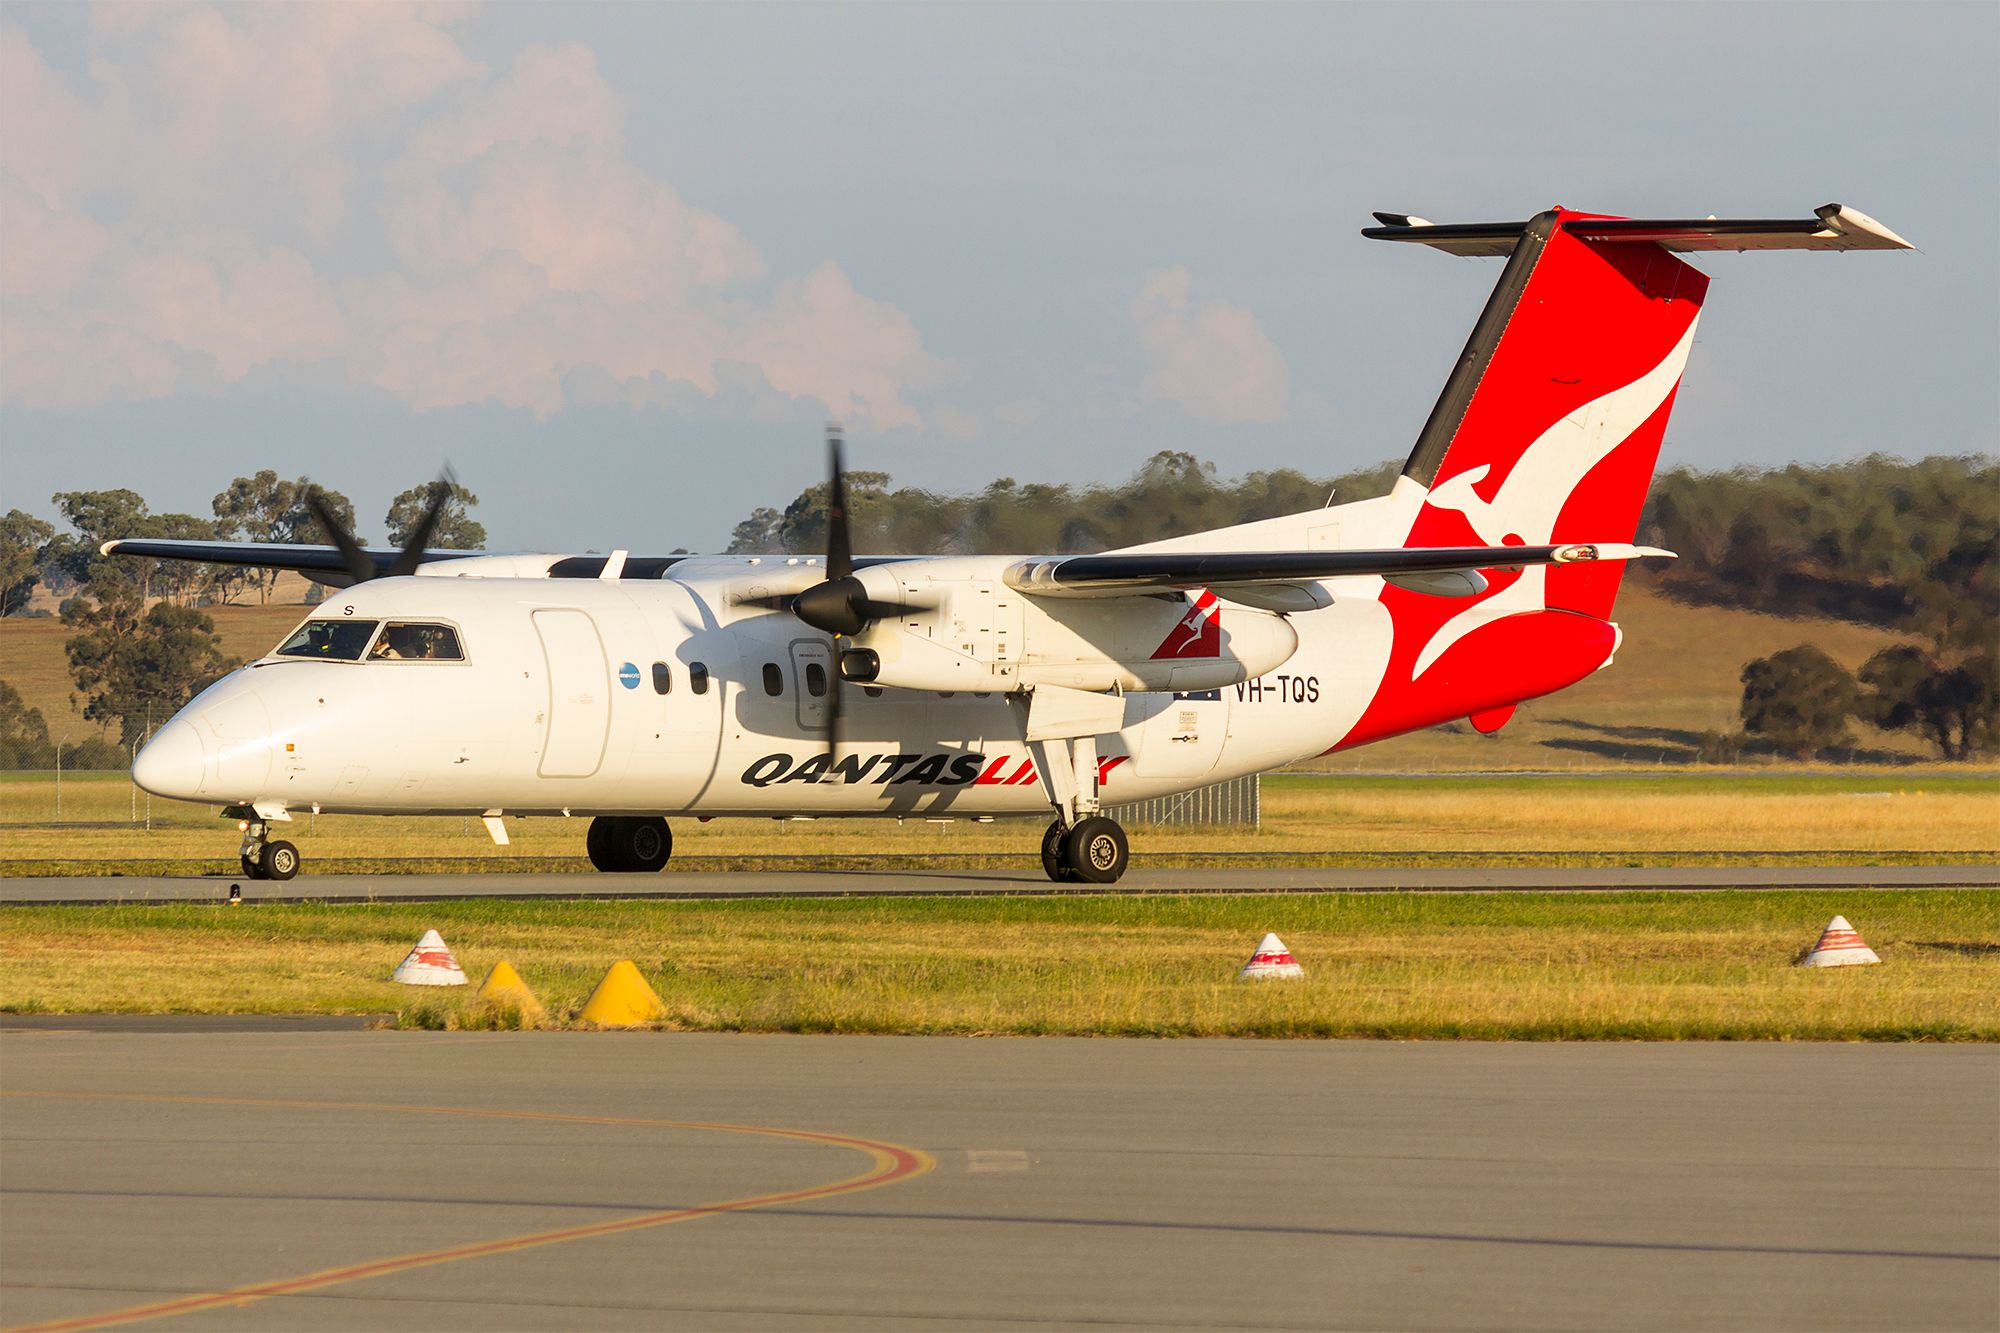 A QantasLink Dash 8 Series 200 aircraft, registration VH-TQS, taxiing to the runway.